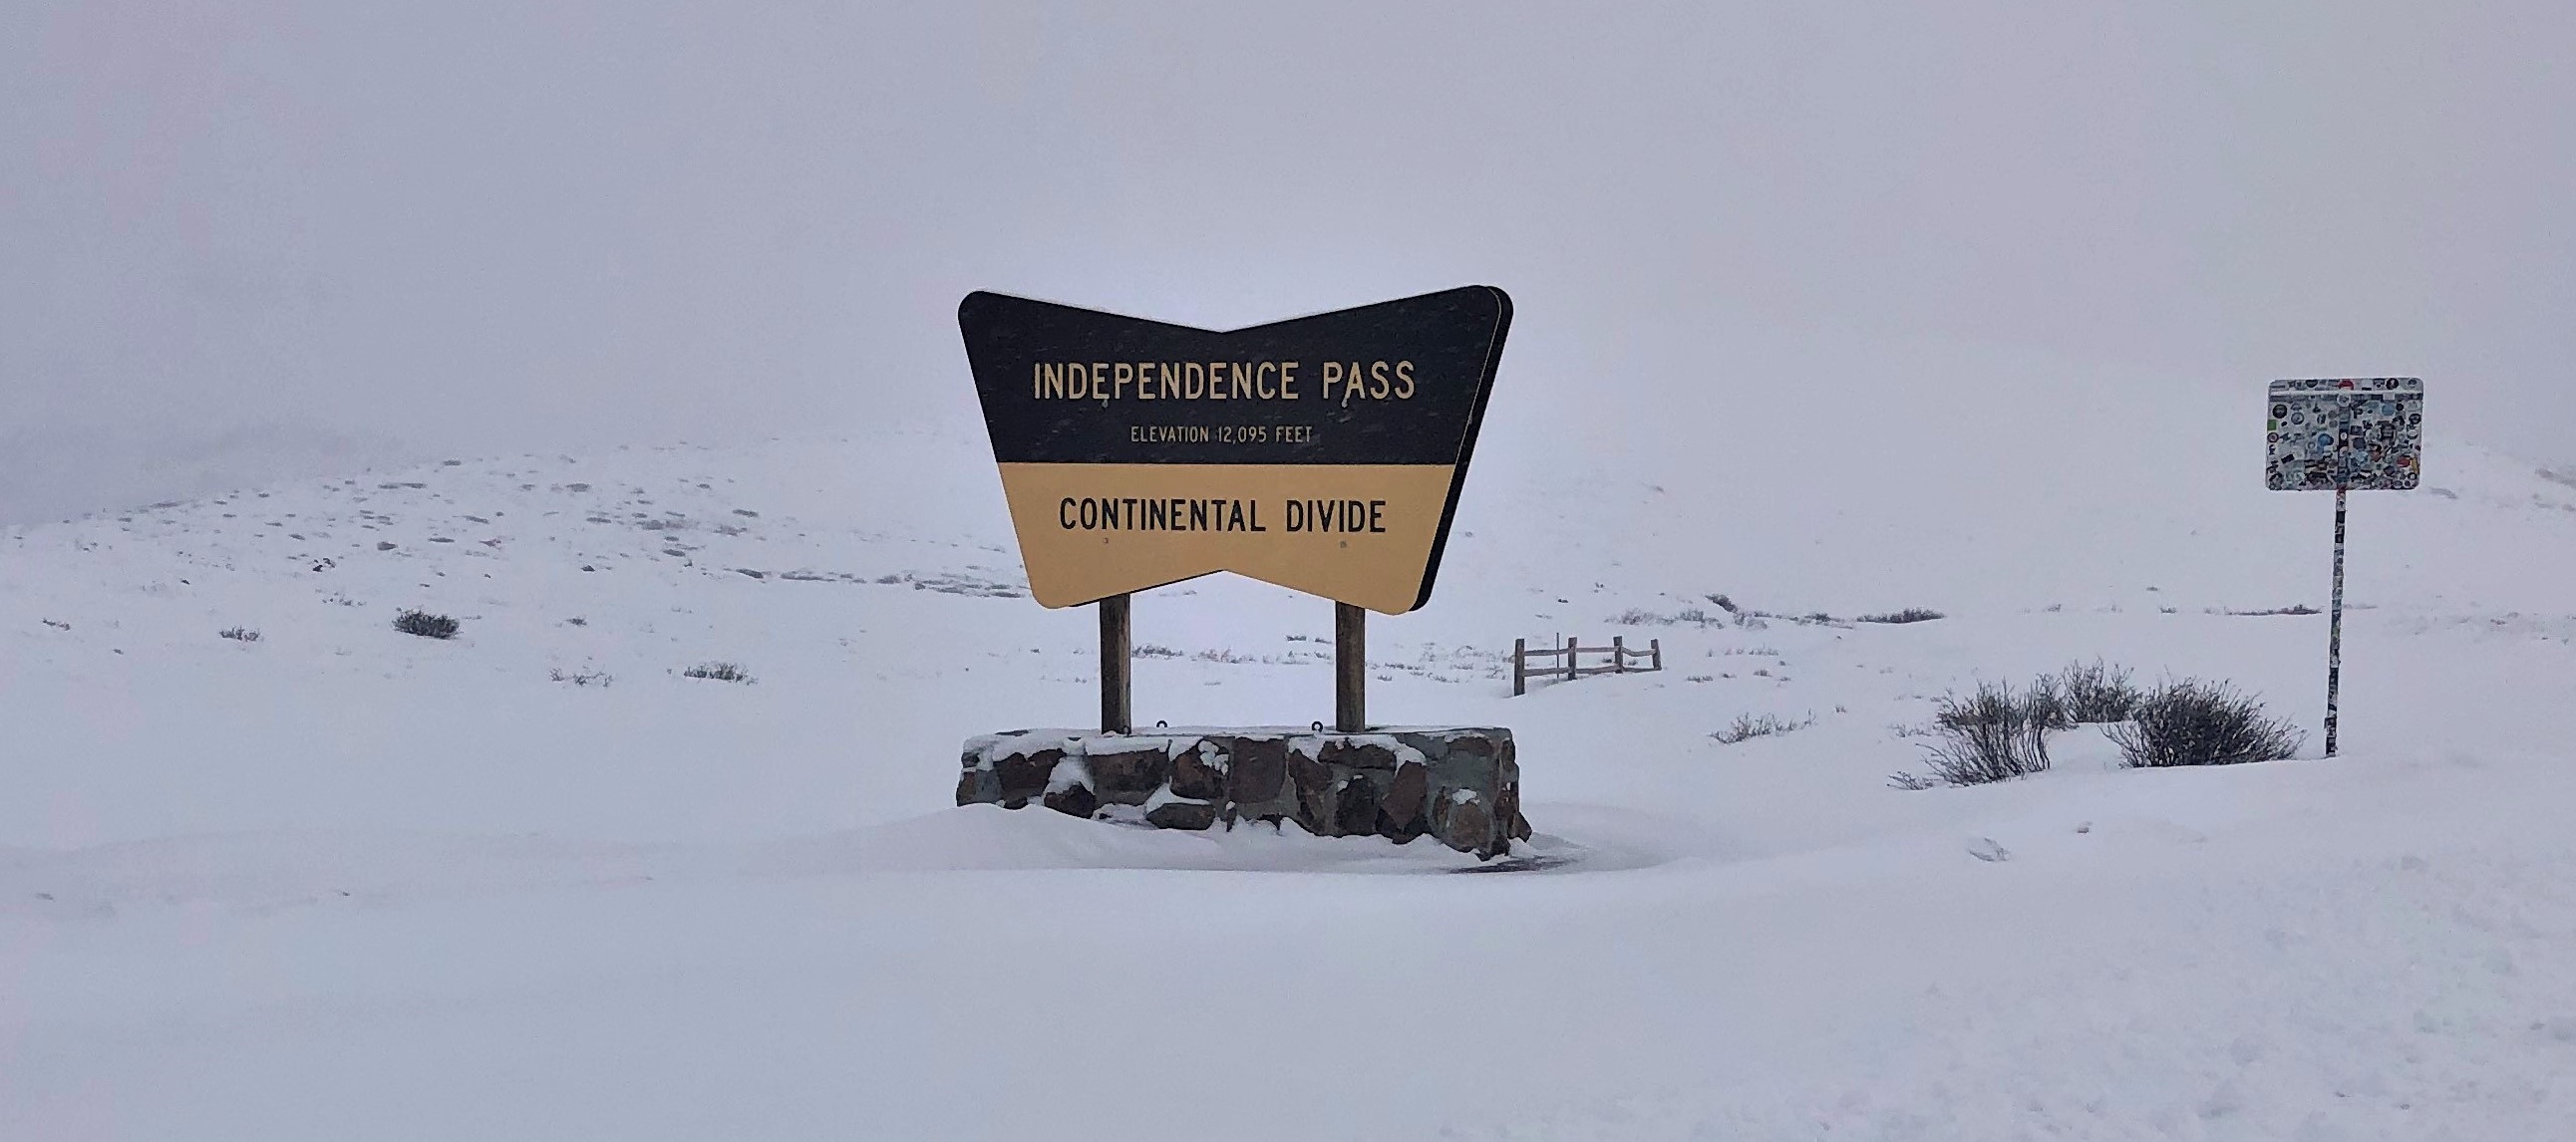 Independence Pass sign in the snow detail image